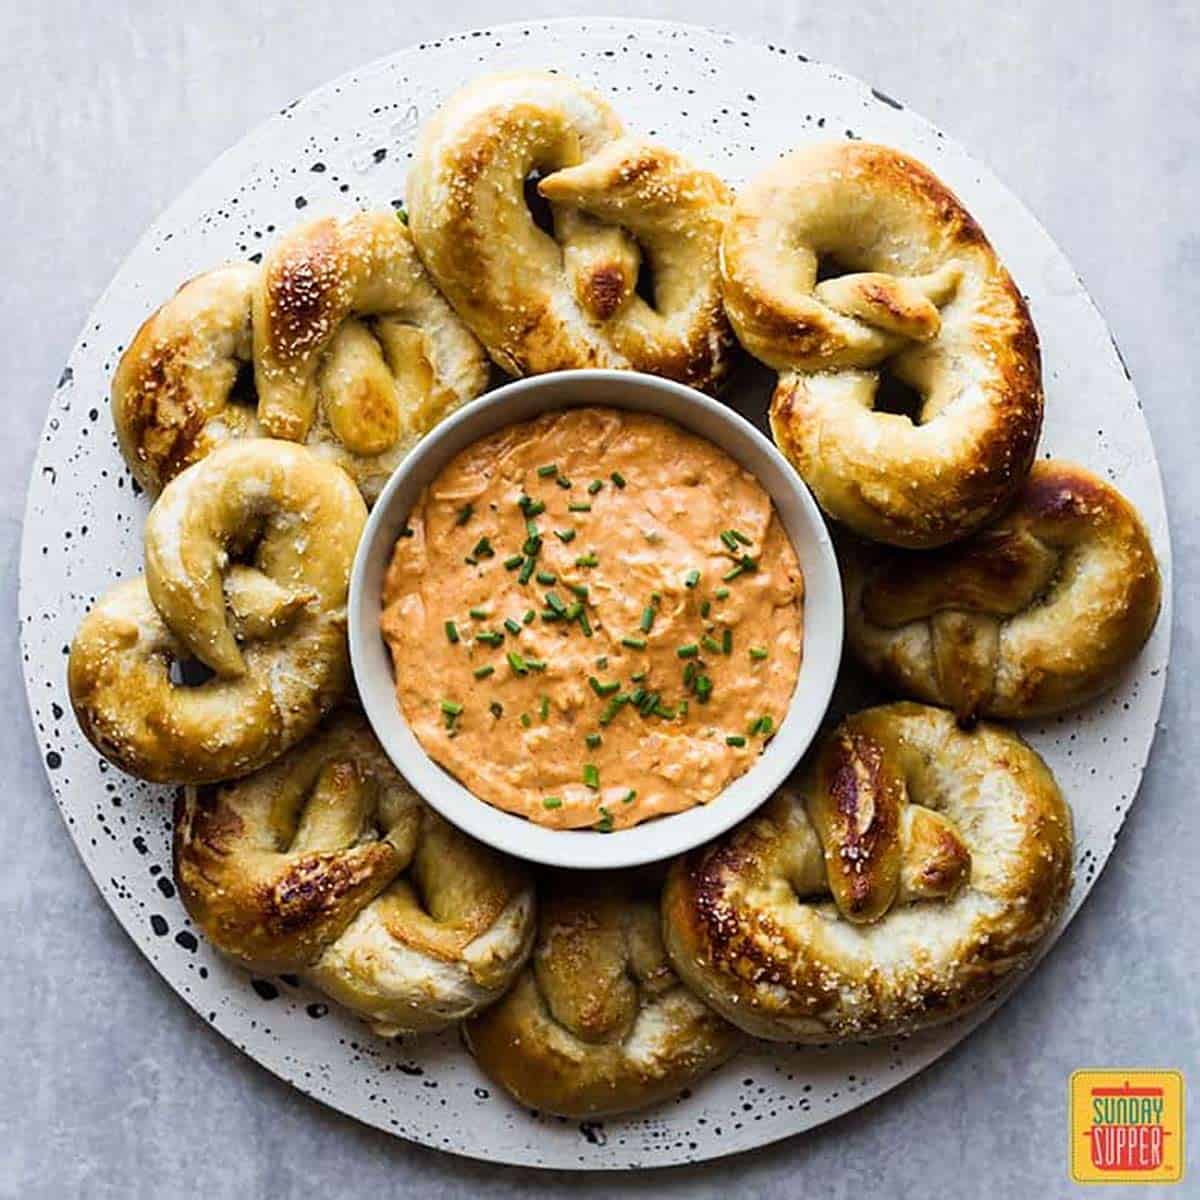 Beer cheese dip (obatzda) in a white bowl surrounded by soft pretzels on a white plate